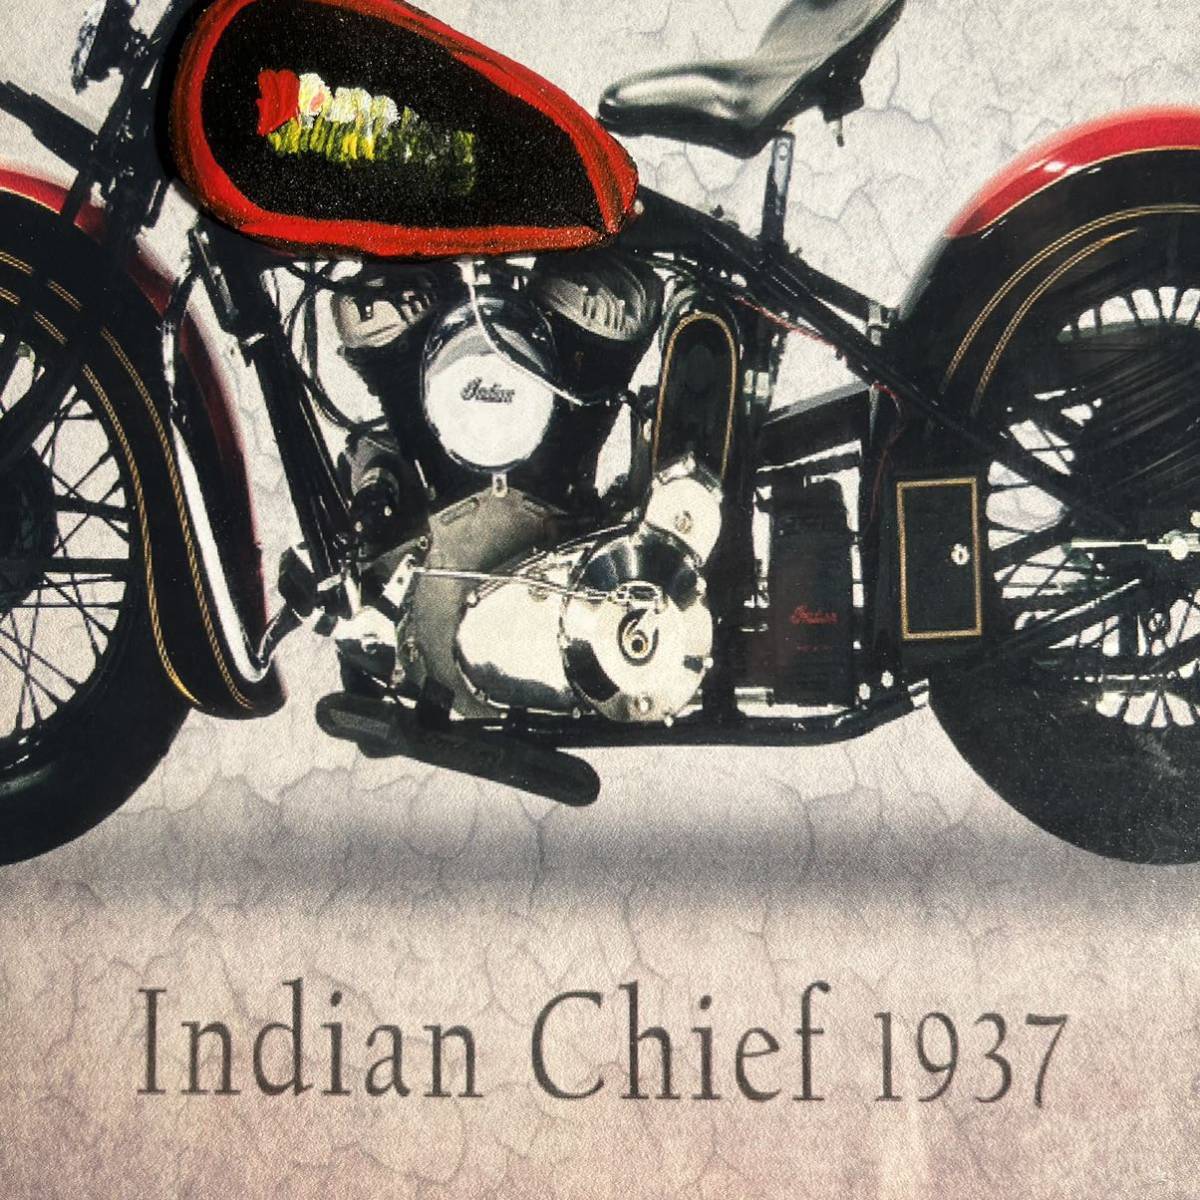  panel lure to american bike Indian chief 1937 amount attaching interior 